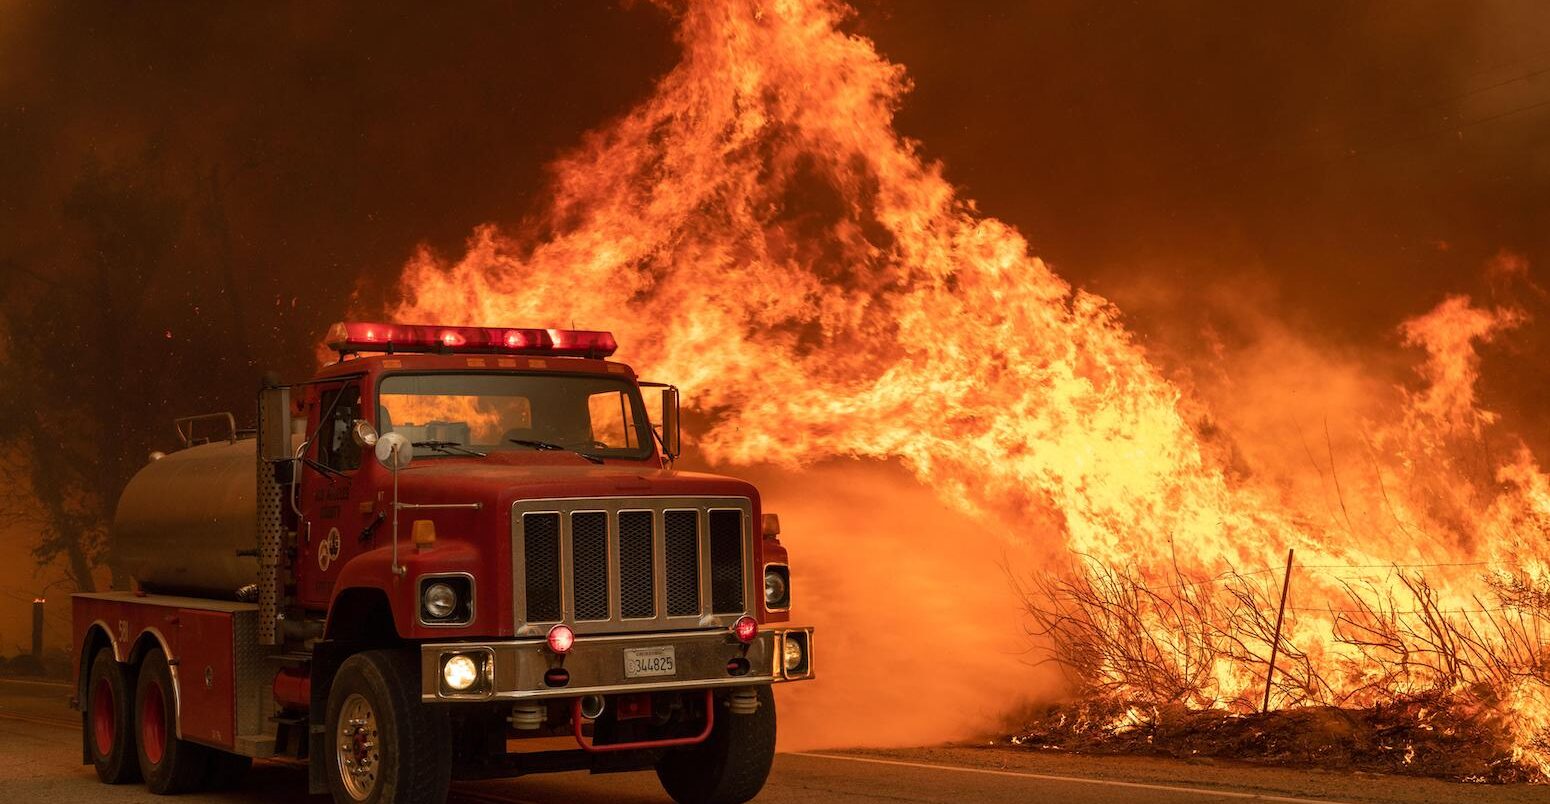 A Los Angeles County fire truck attacks flames in Valyermo, California.